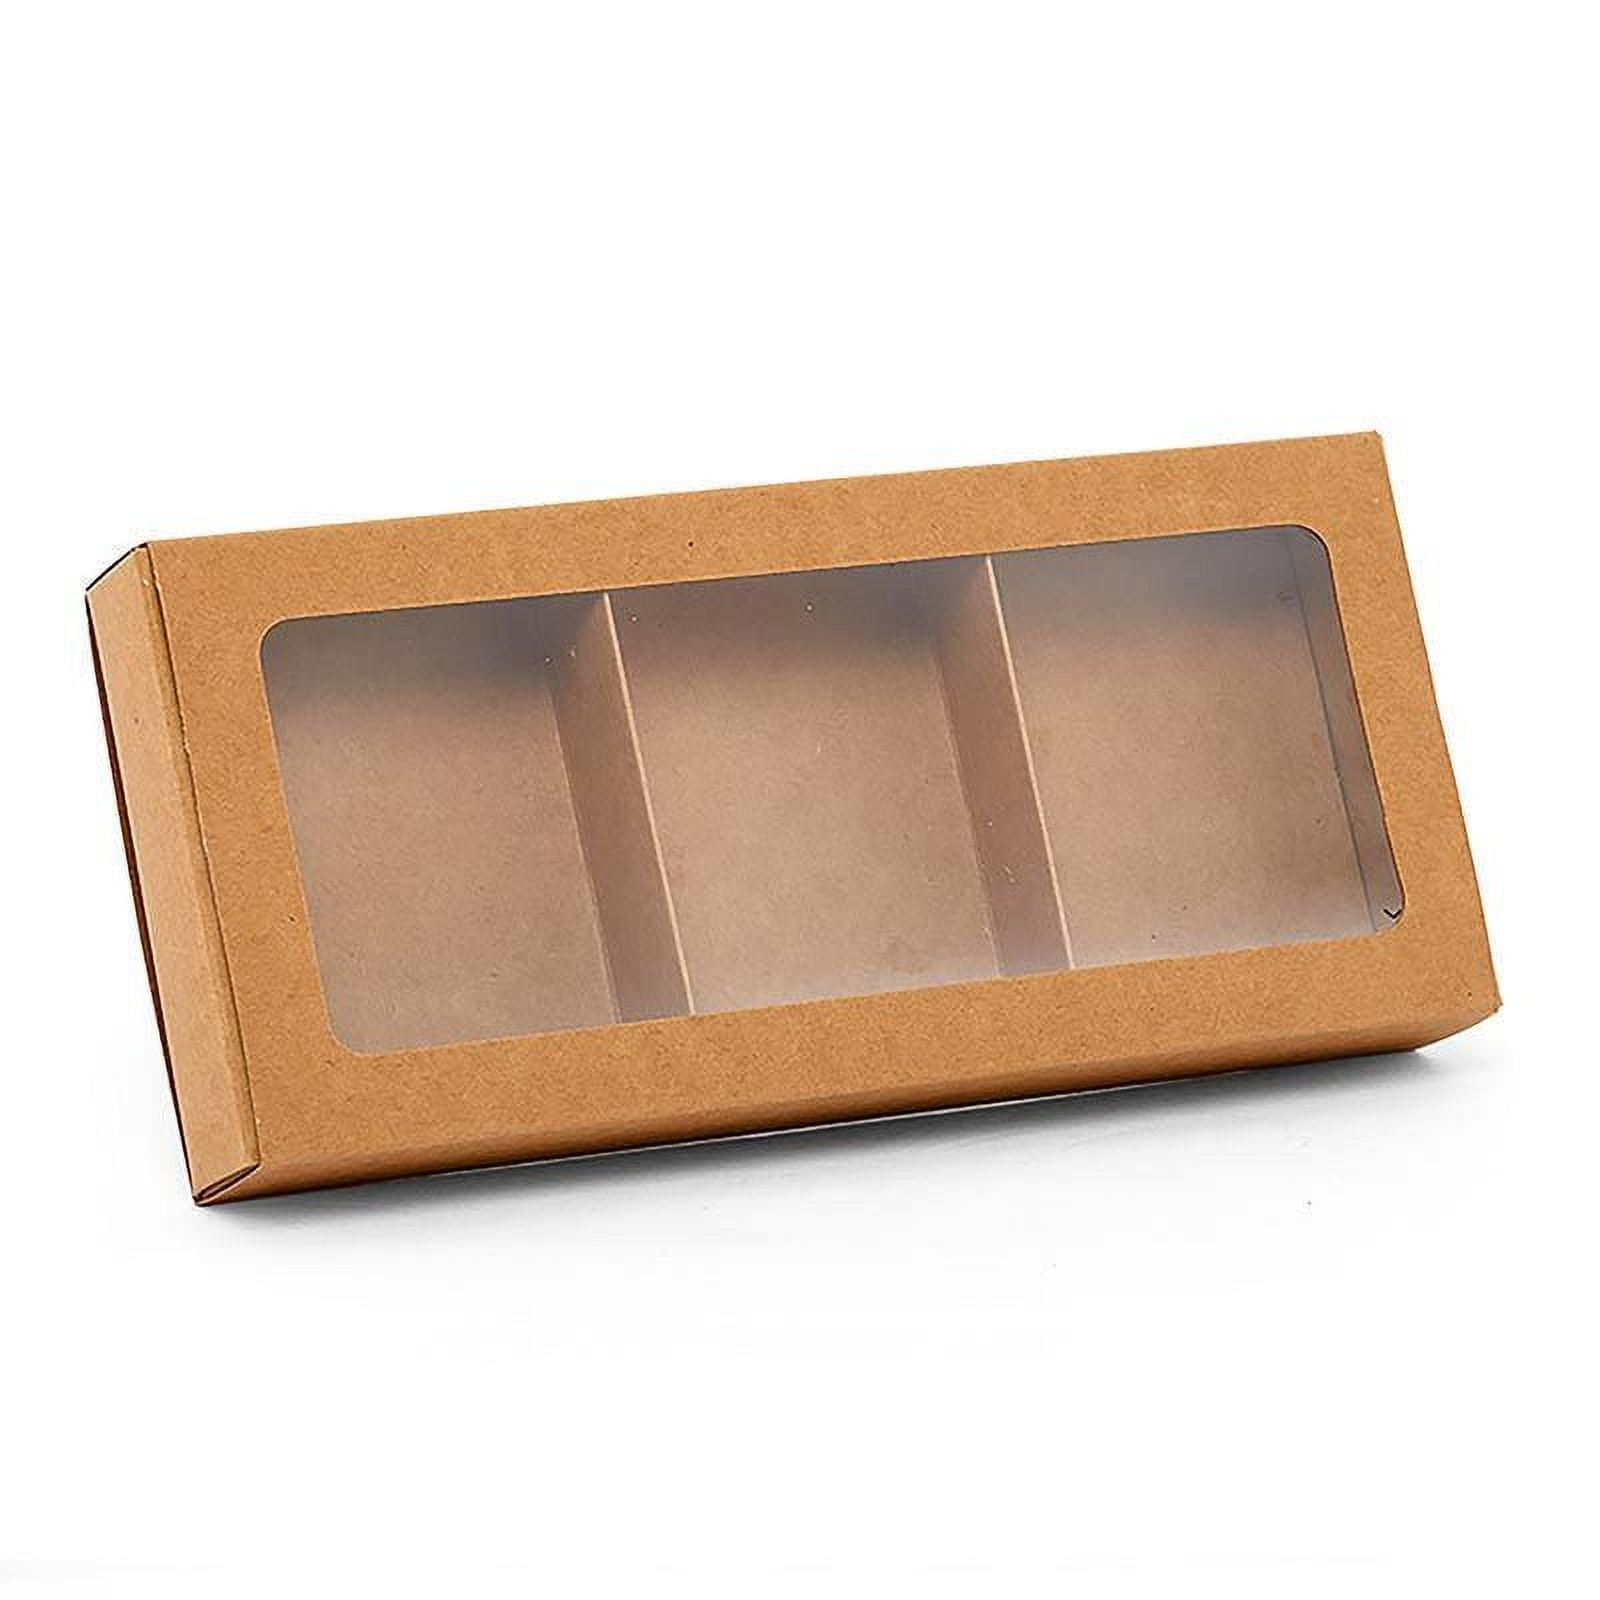 Uxcell 3x3x1.5 Paper Soap Box with Window Homemade Soap Boxes Square  Presents Packaging Boxes, Brown 30 Pack